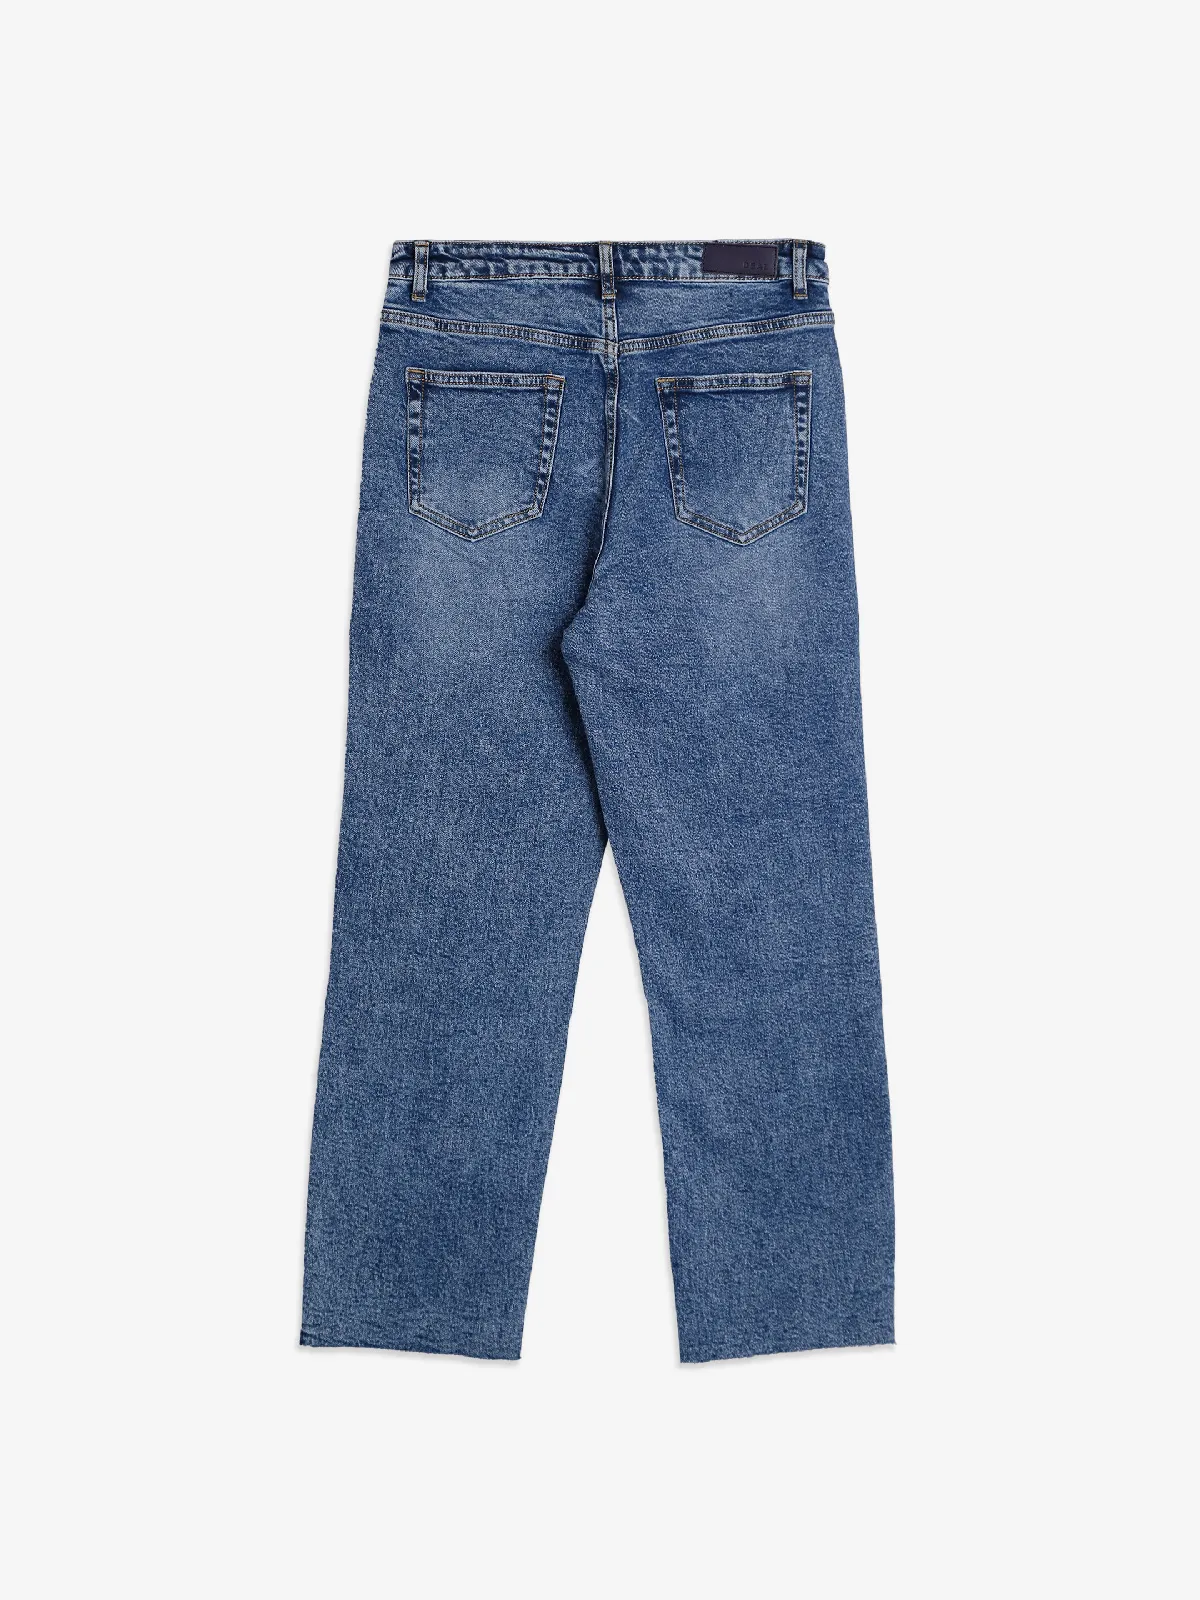 Deal blue washed and ripped straight jeans